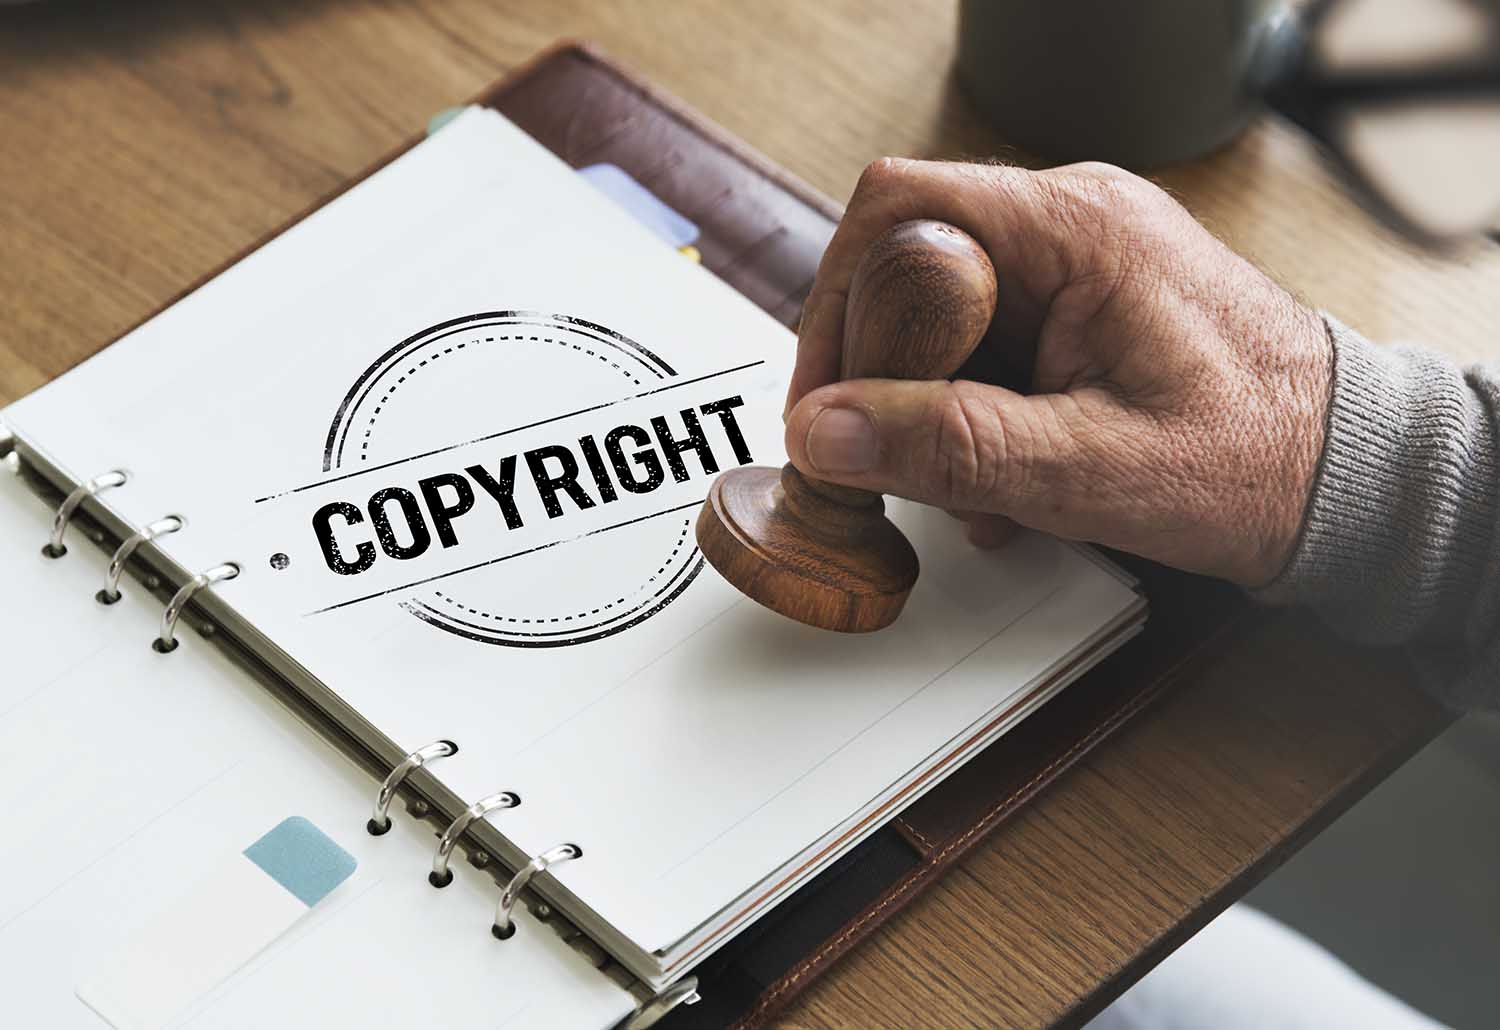 Legal considerations and copyright protection